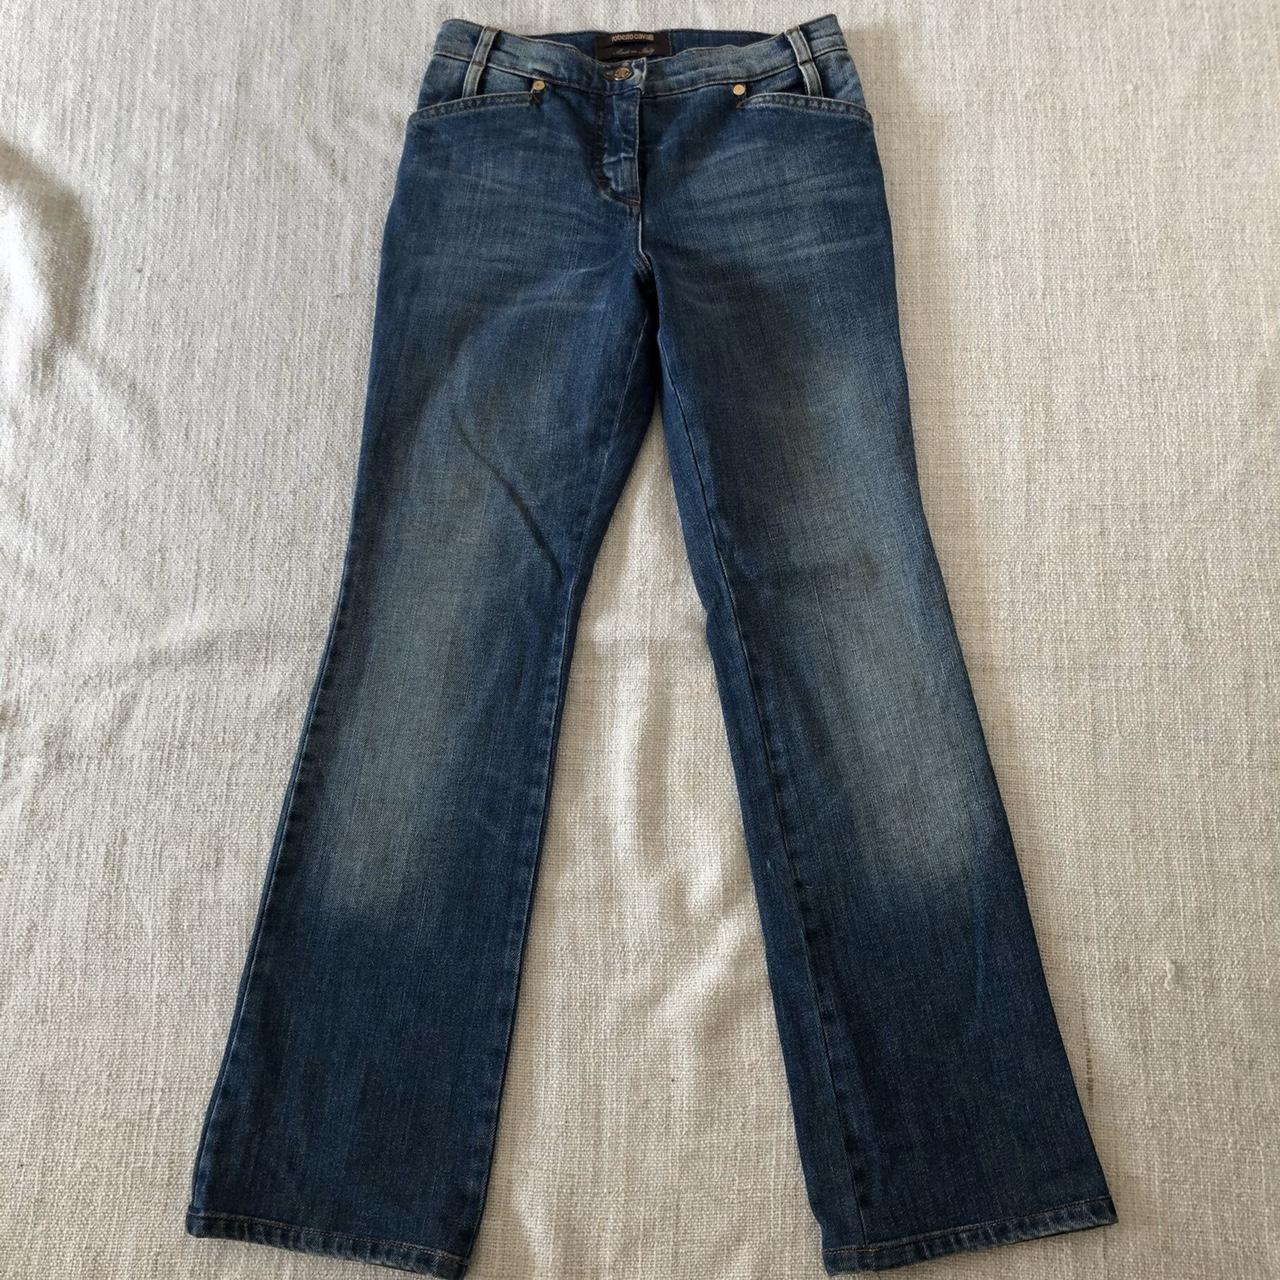 Roberto Cavalli Jeans Like New size 38 made in Italy - Depop